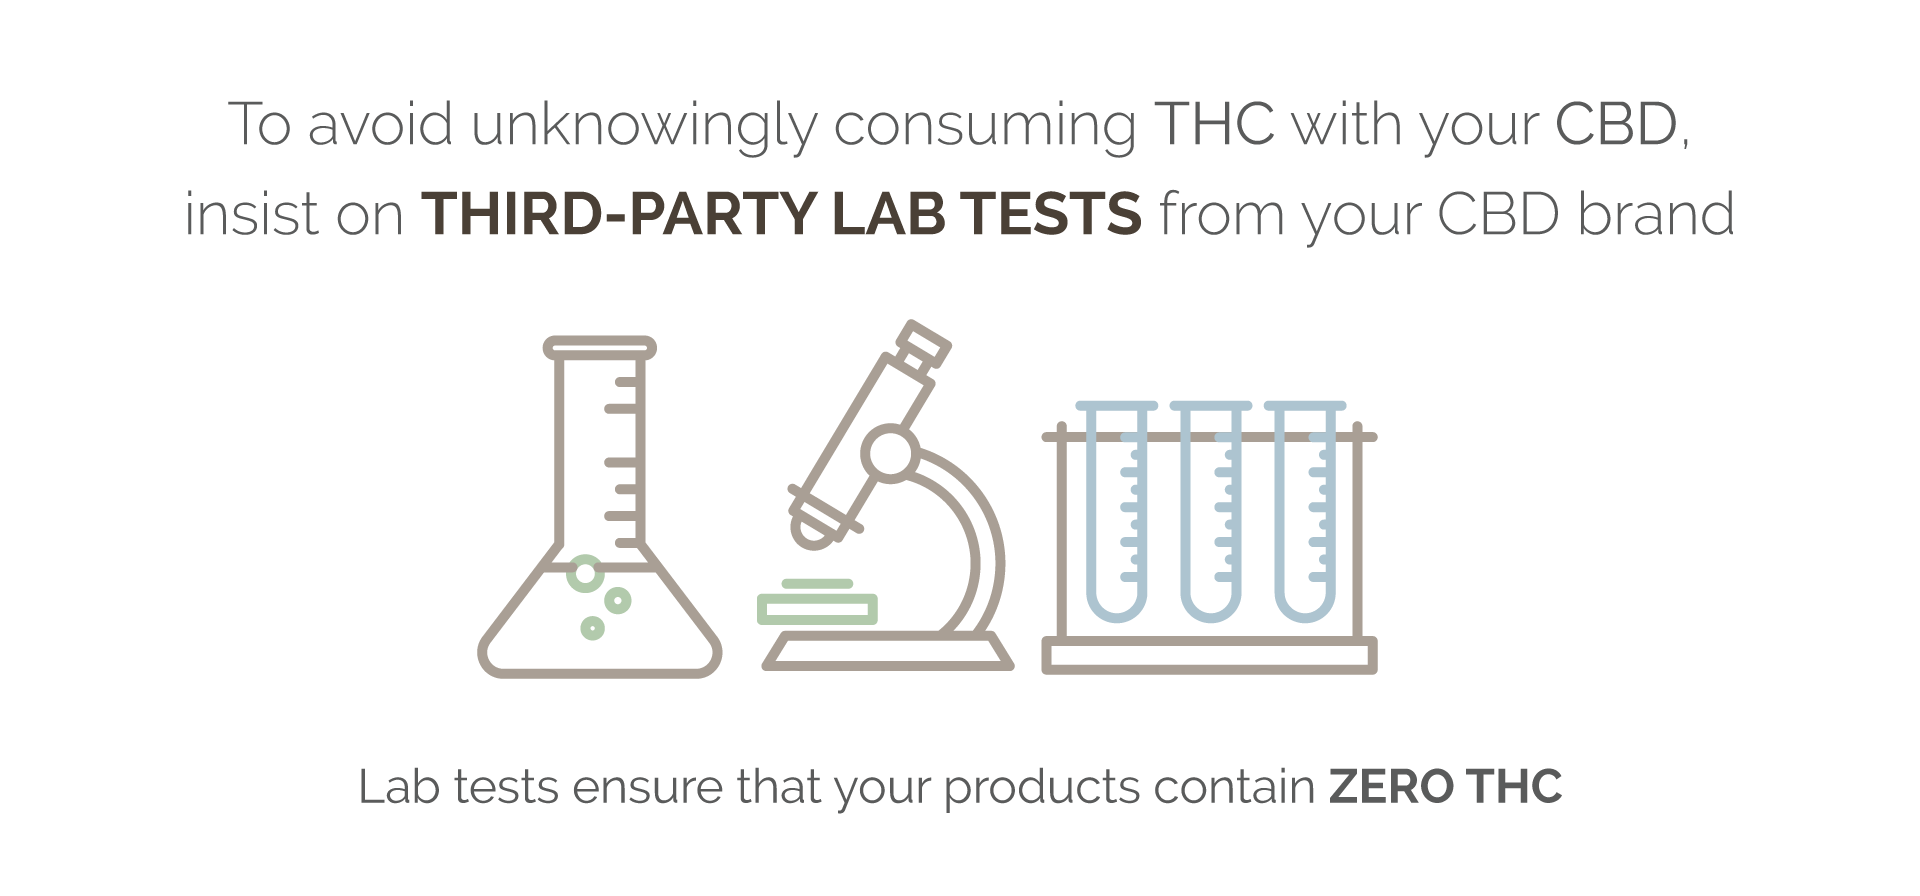 insist on third-party lab tests from your CBD brand